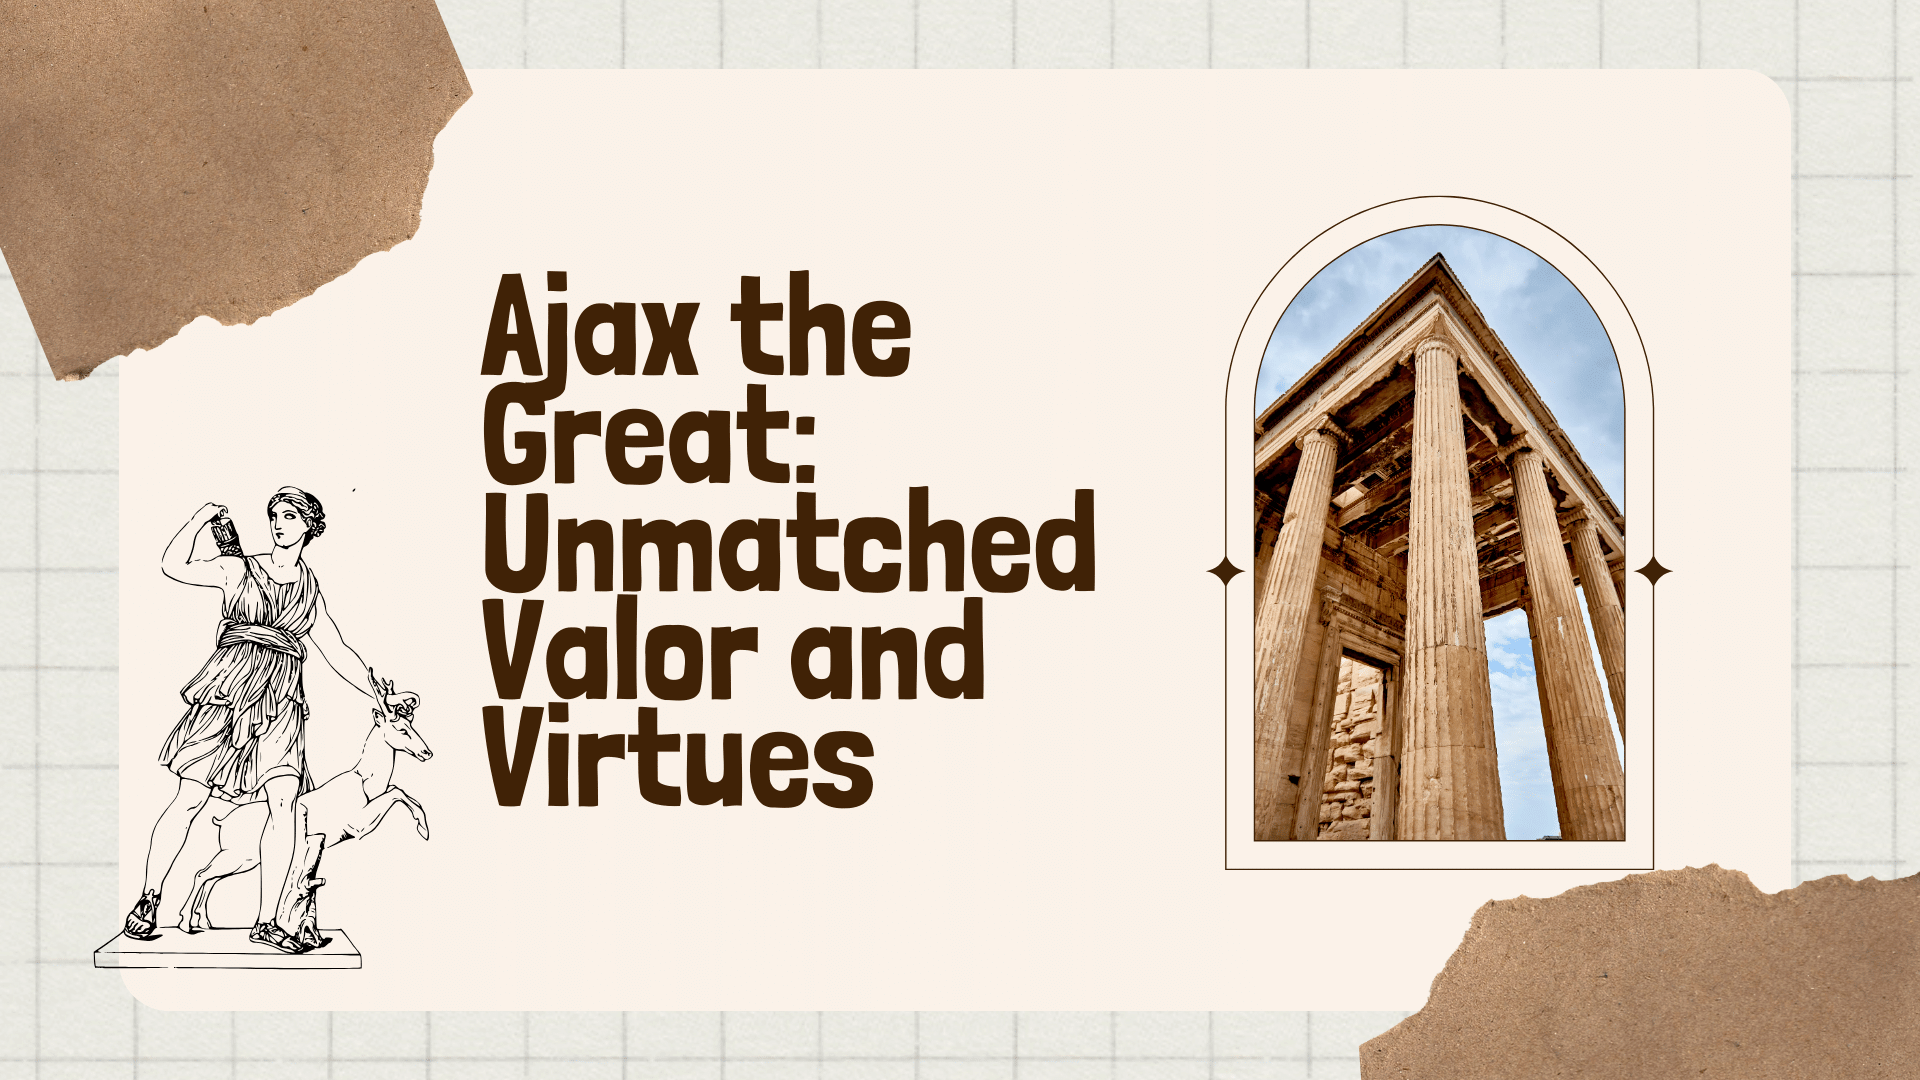 Ajax the Great: Unmatched Valor and Virtues